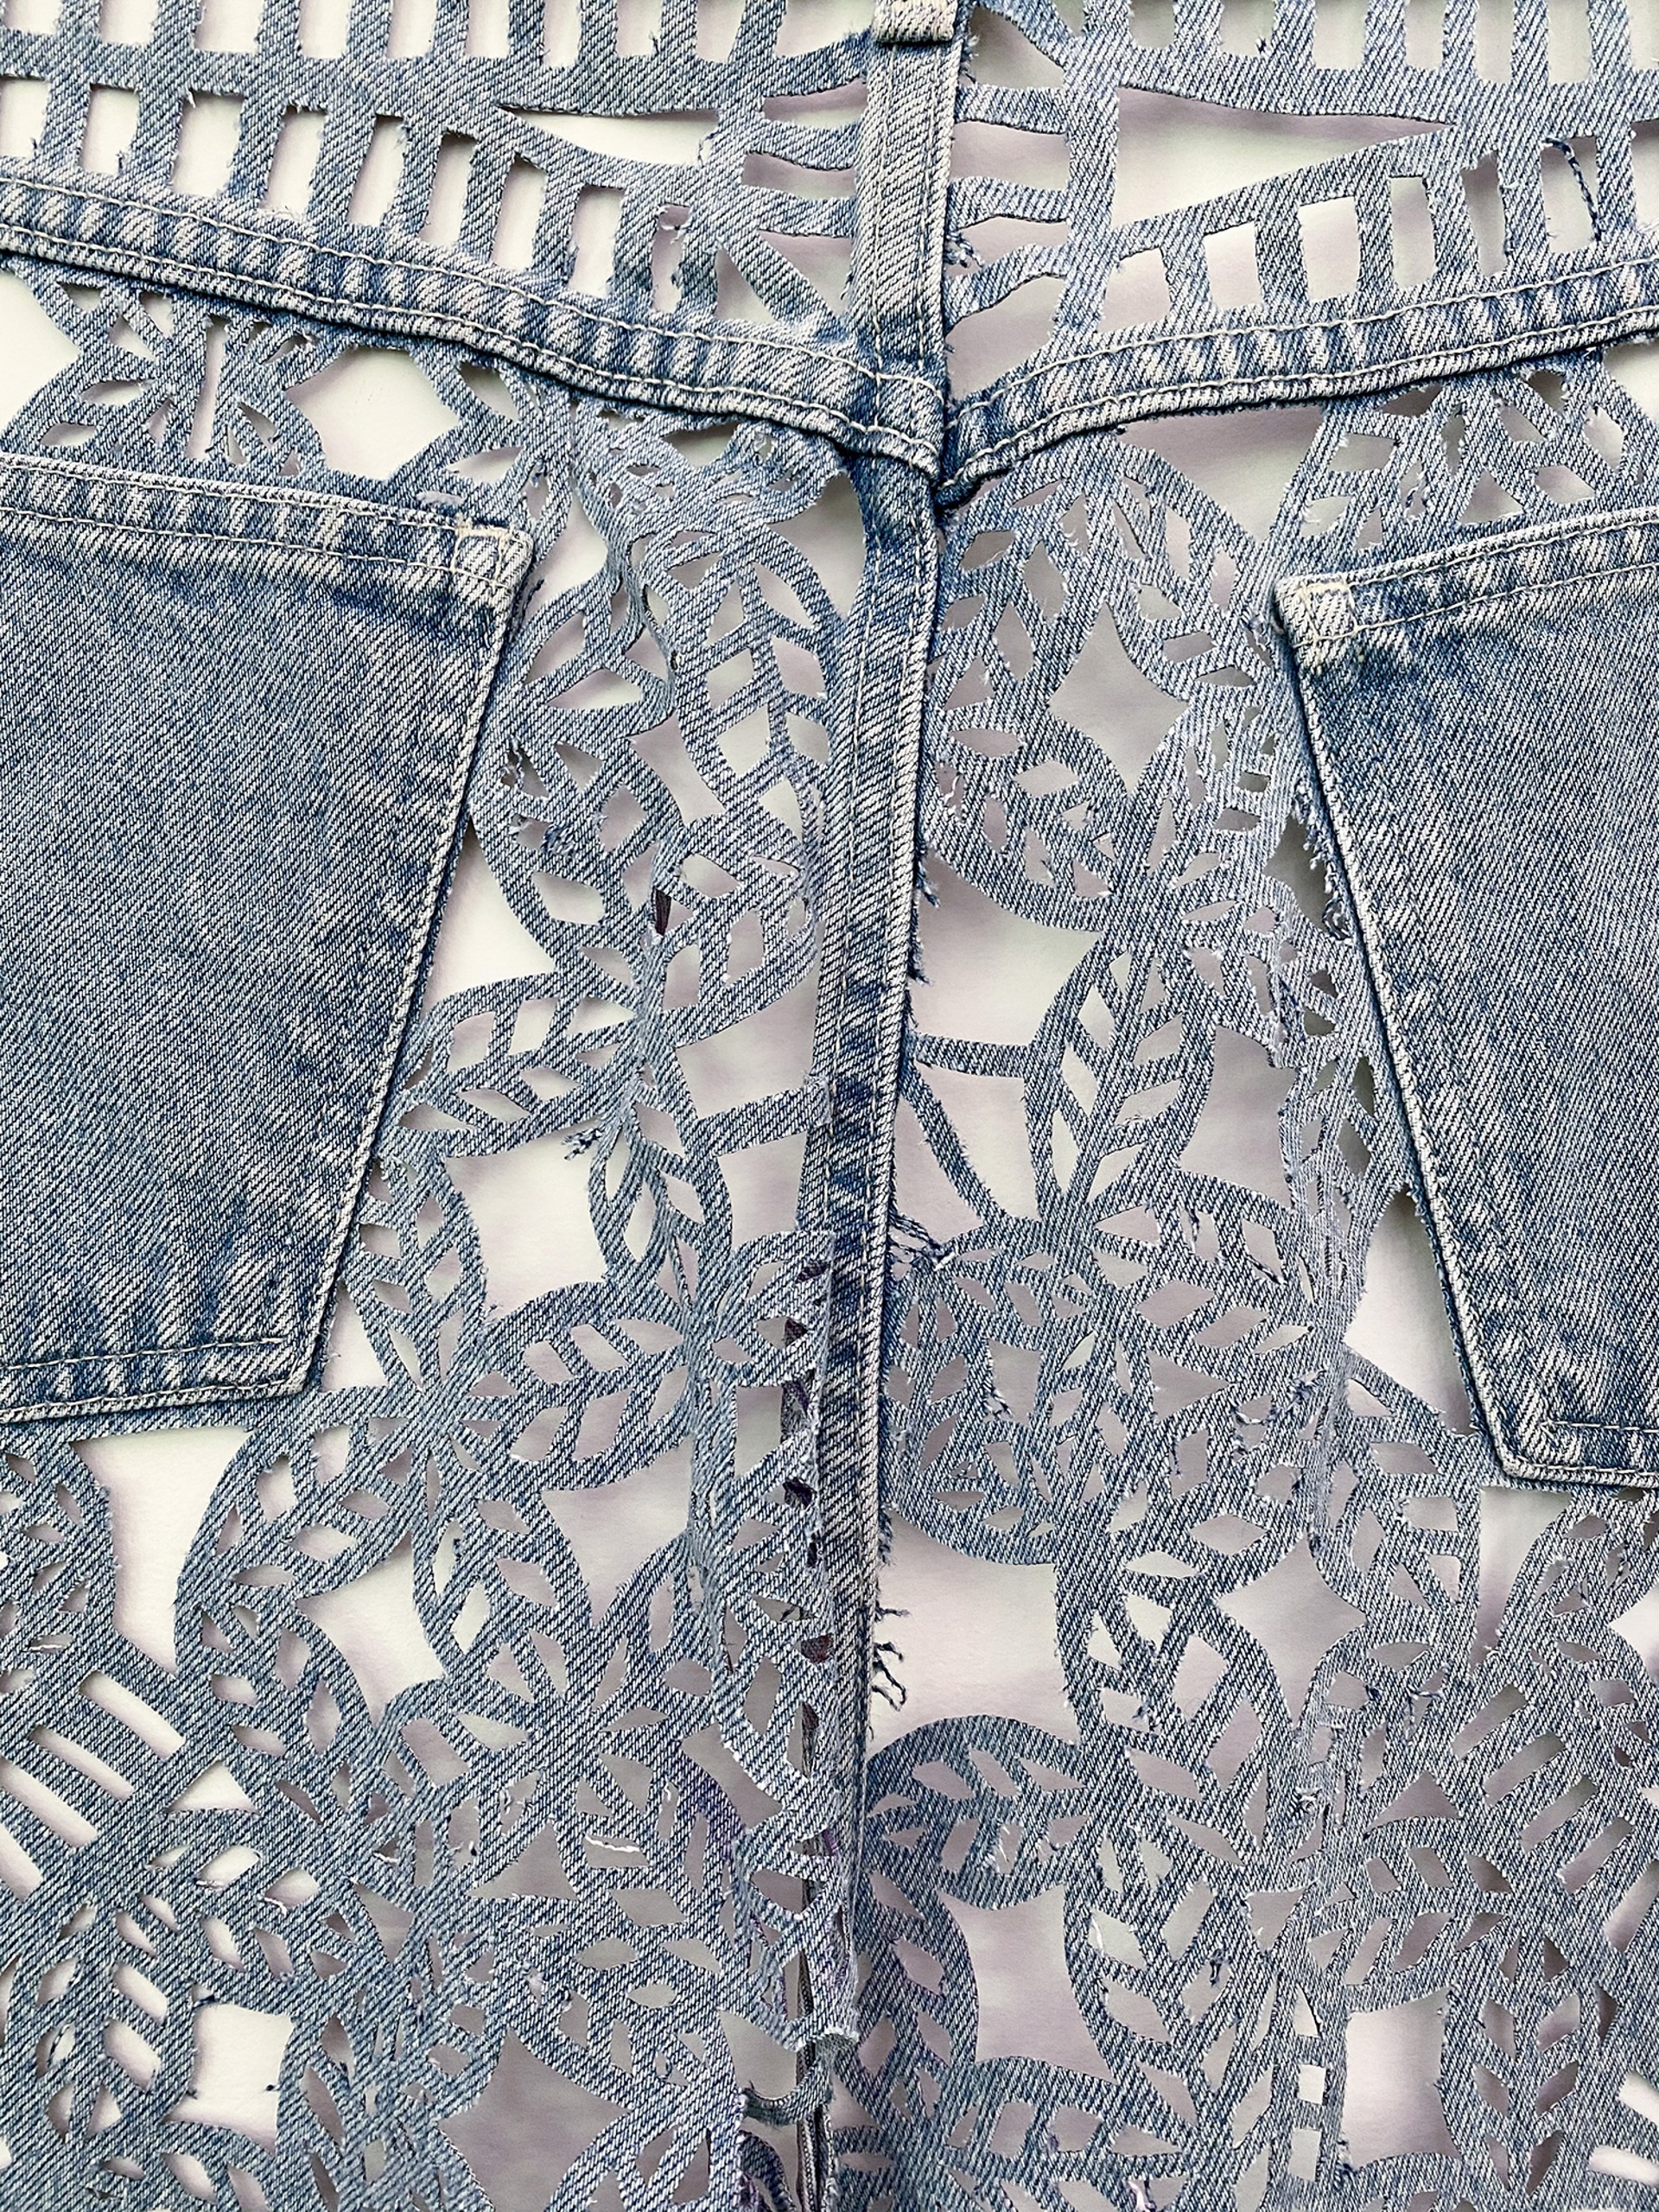 Meticulously Distressed Denim Jeans, Honiton Lace by Libby Newell